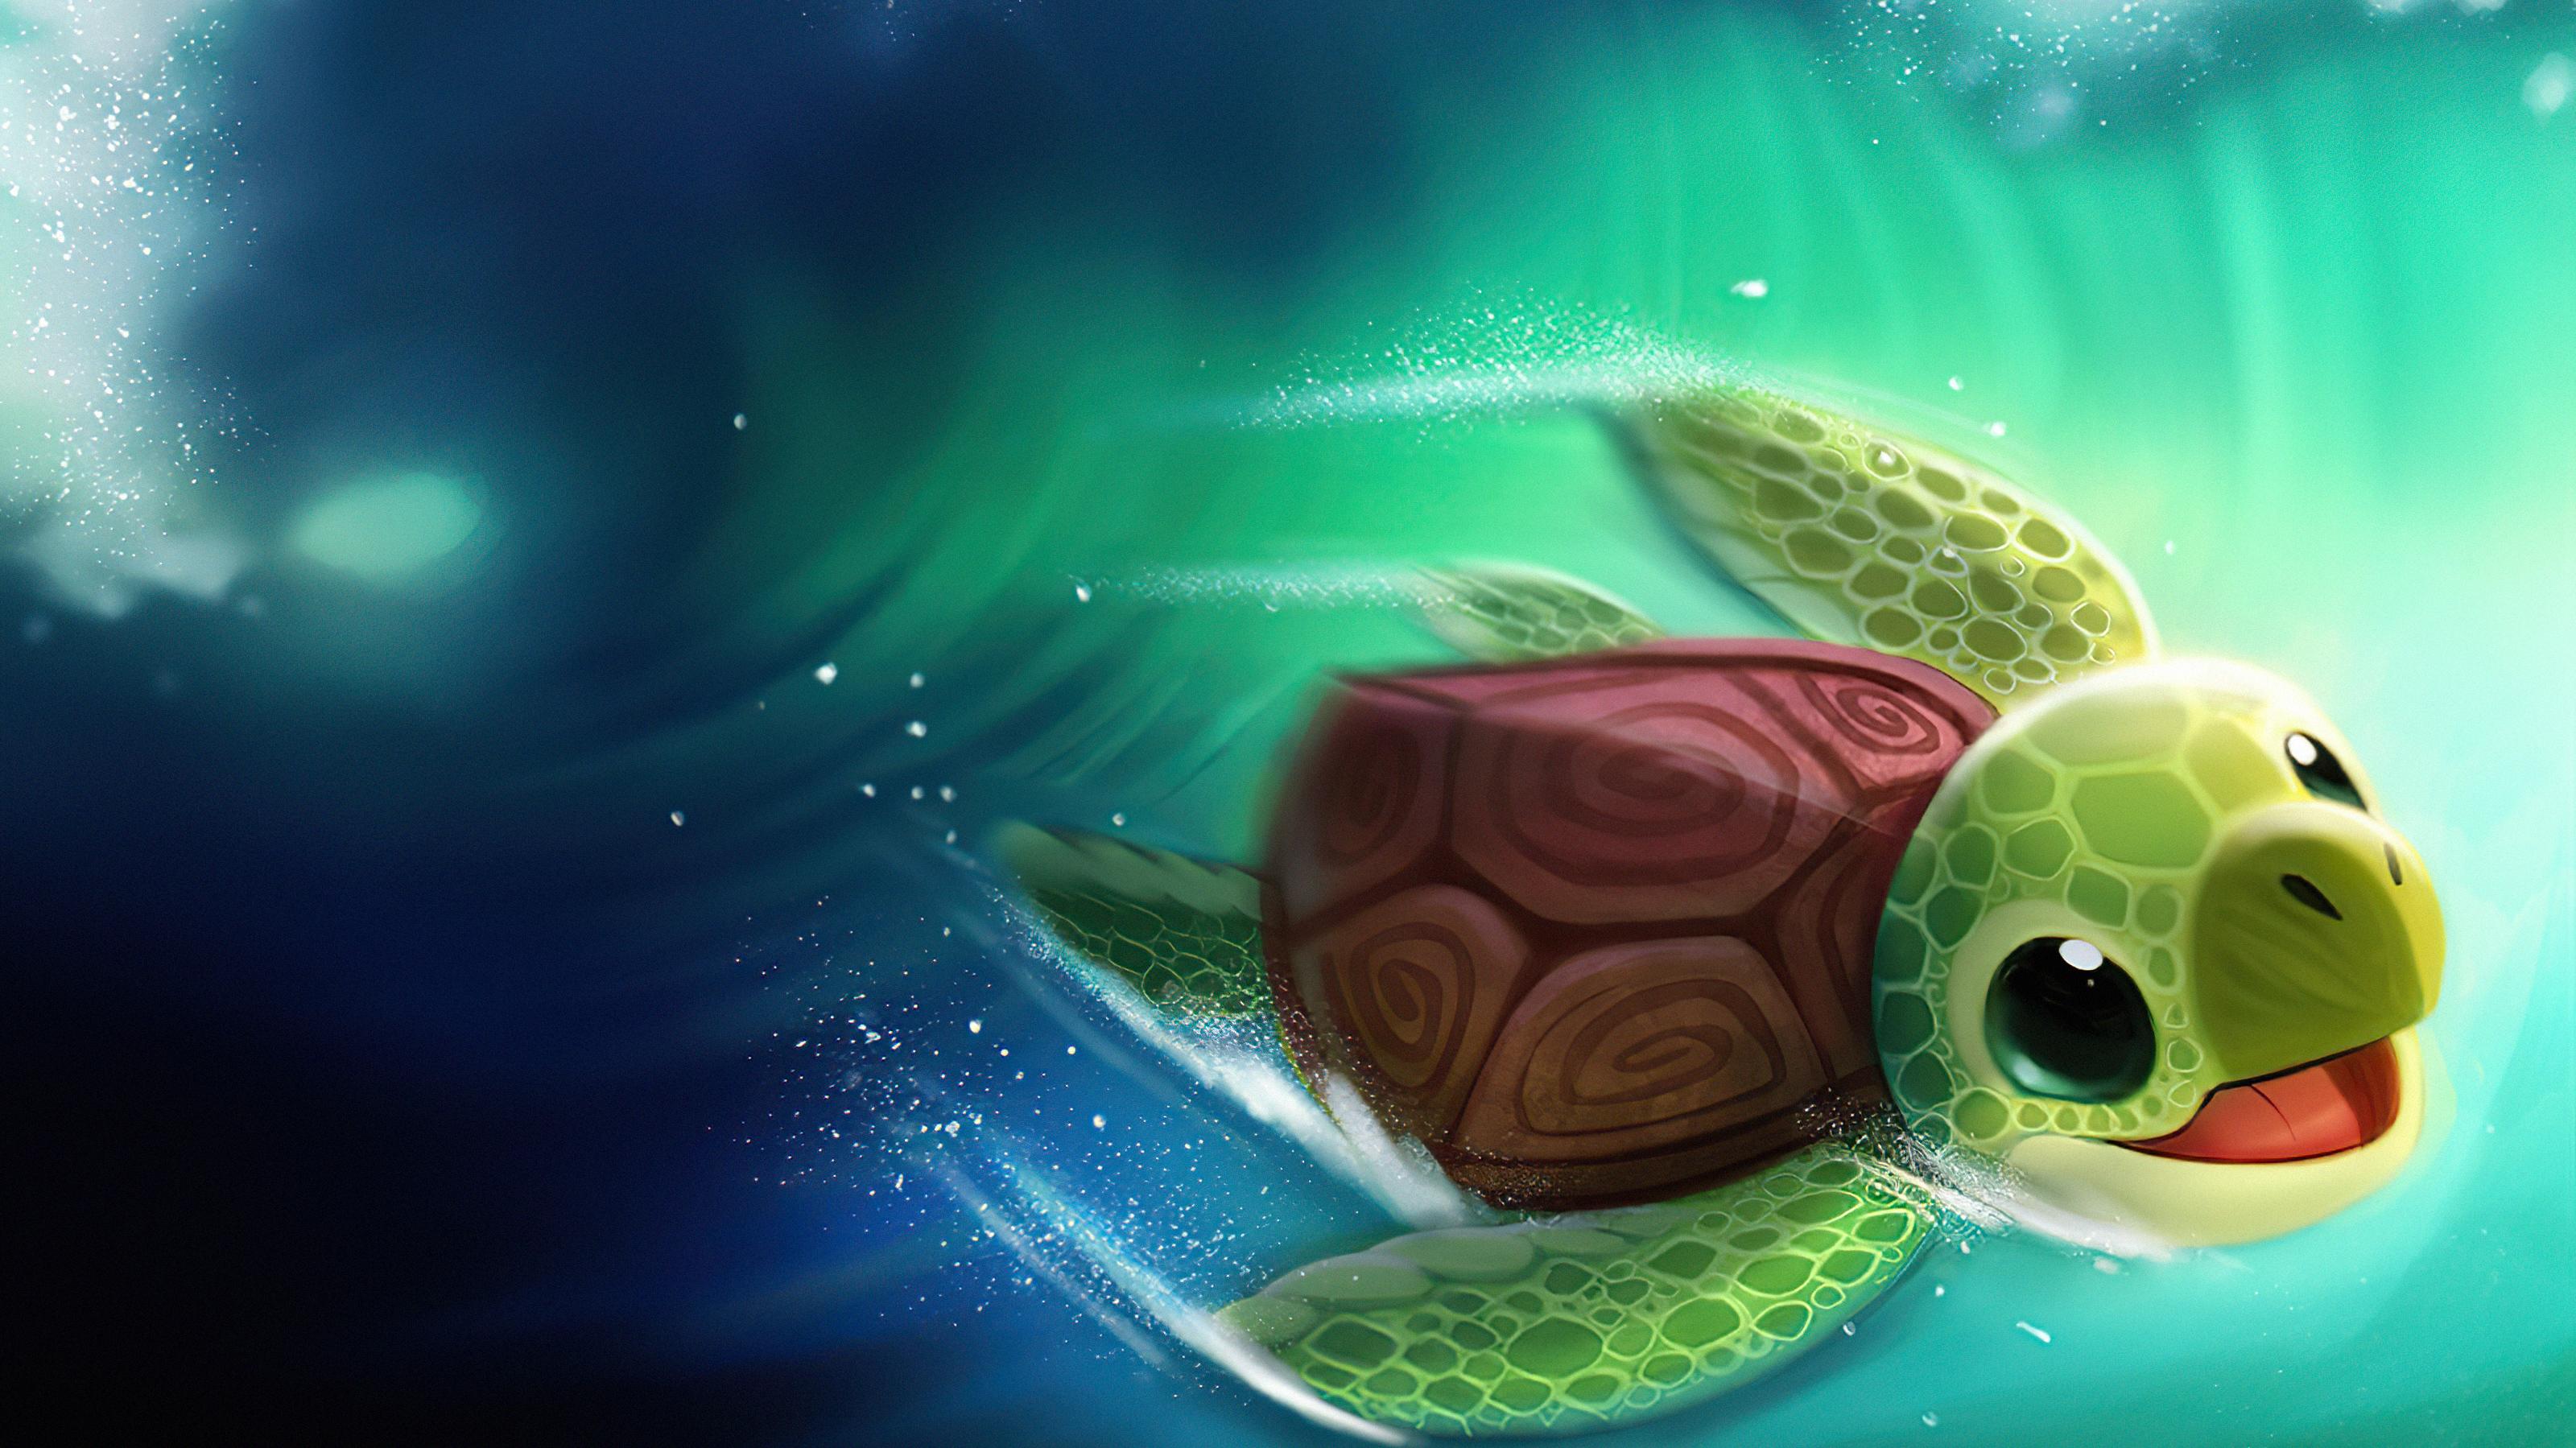 Fantasy Turtle HD Wallpaper By Cryptid Creations